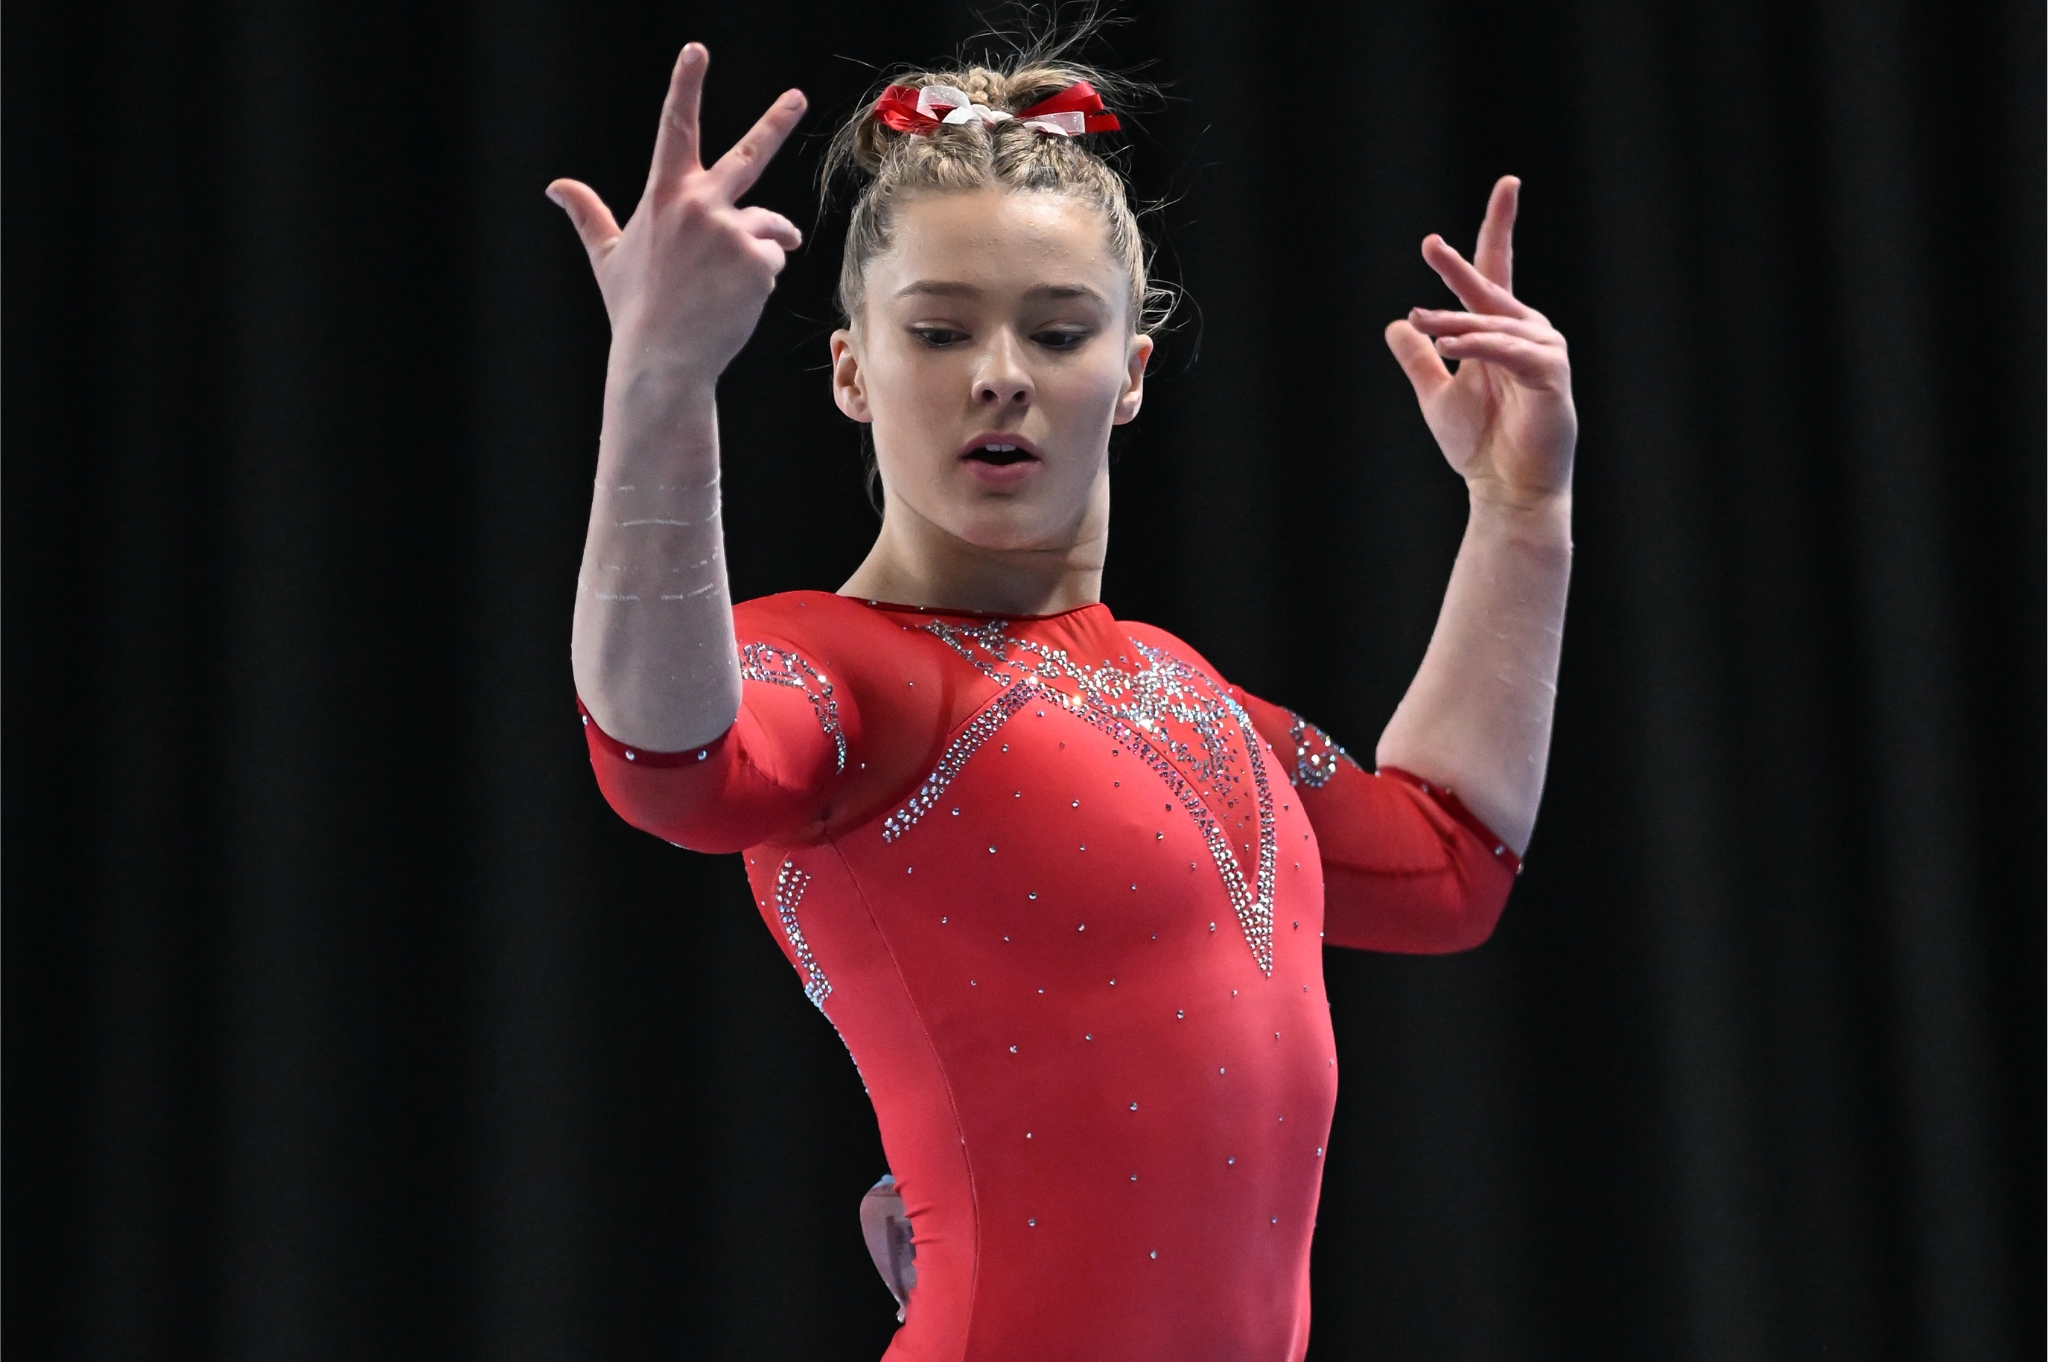 Twin City Twisters' Lexi Zeiss competes on beam during the senior women's competition at the 2023 Winter Cup in Louisville, Kentucky, on Feb. 25.